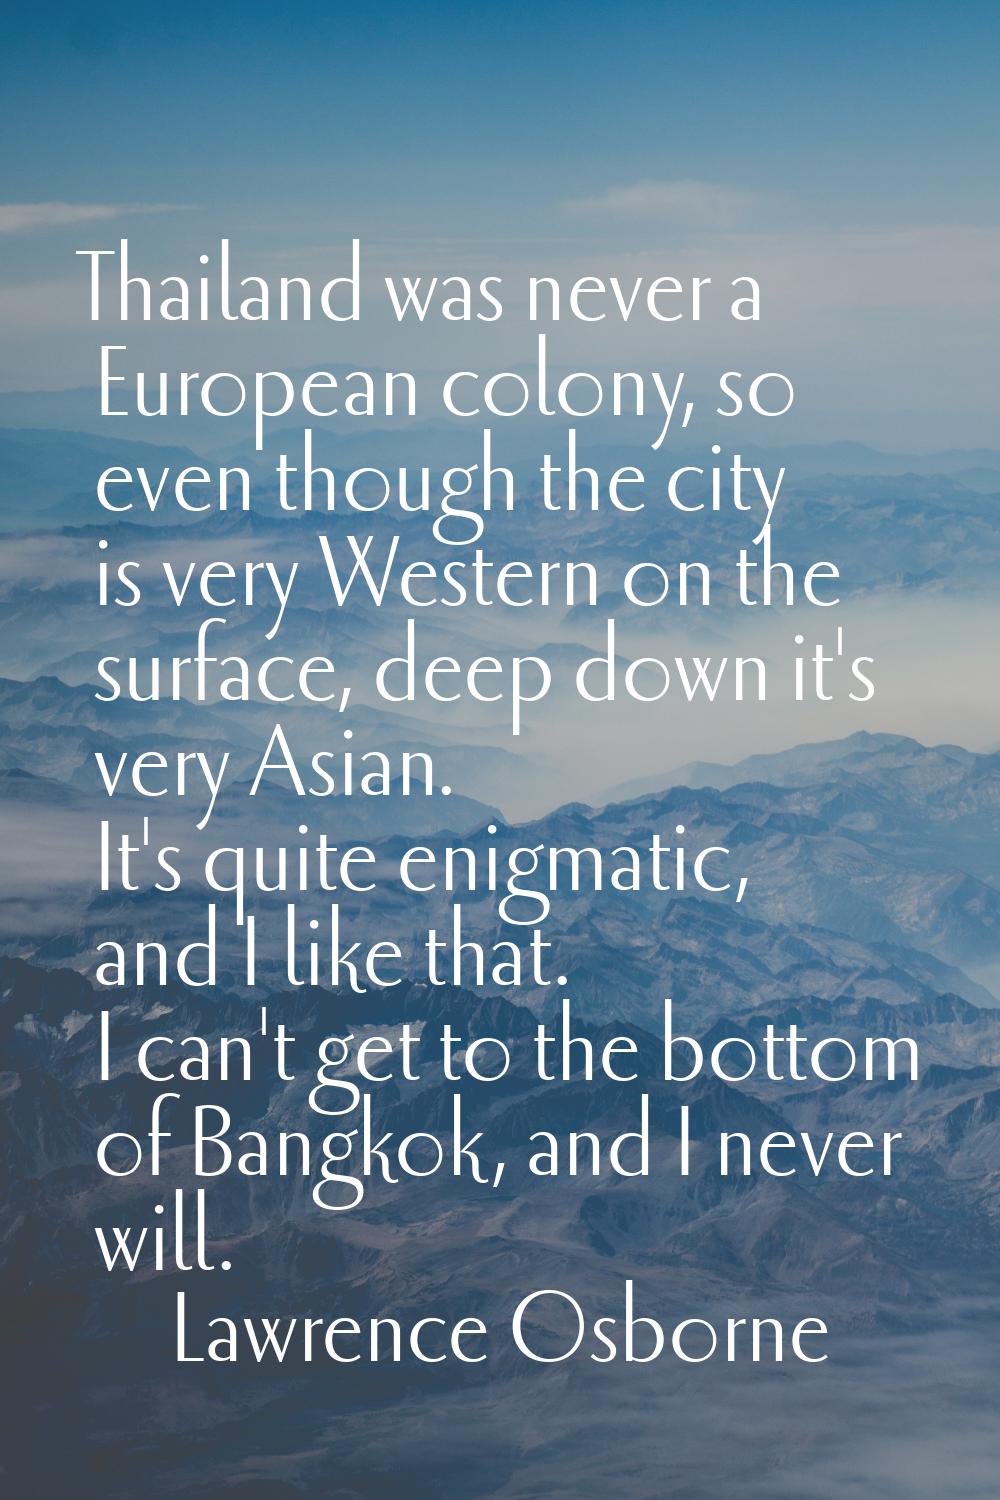 Thailand was never a European colony, so even though the city is very Western on the surface, deep 